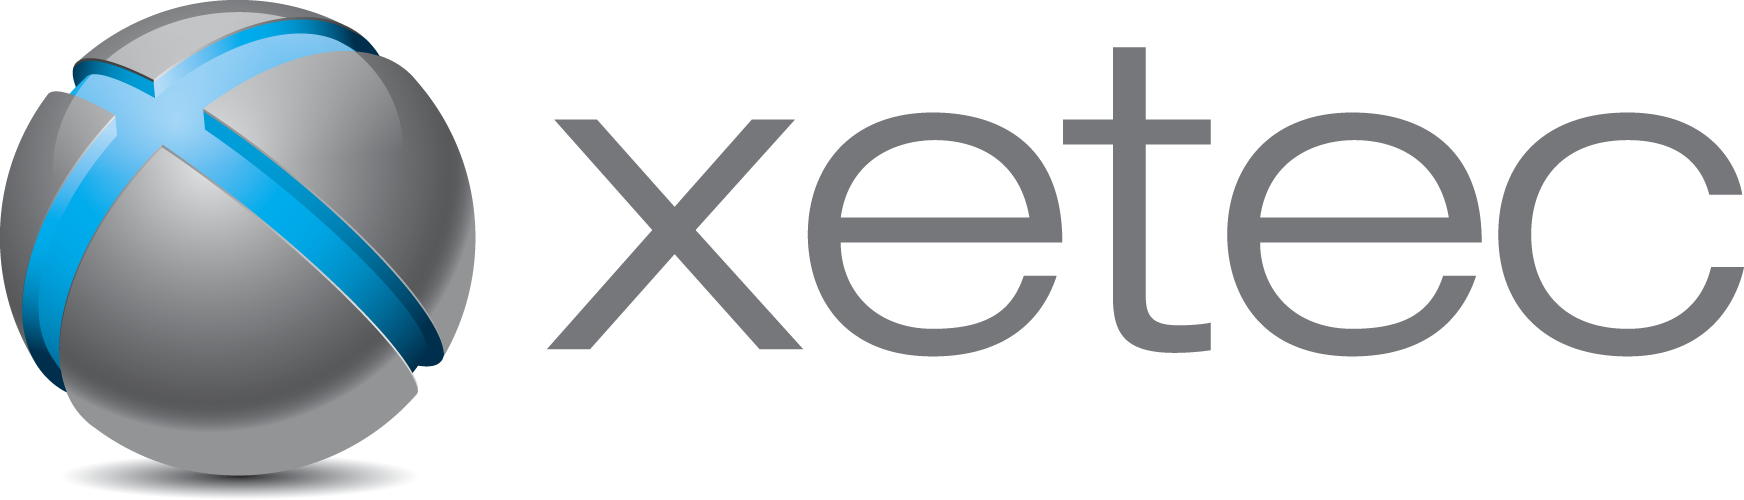 Xetec cmms